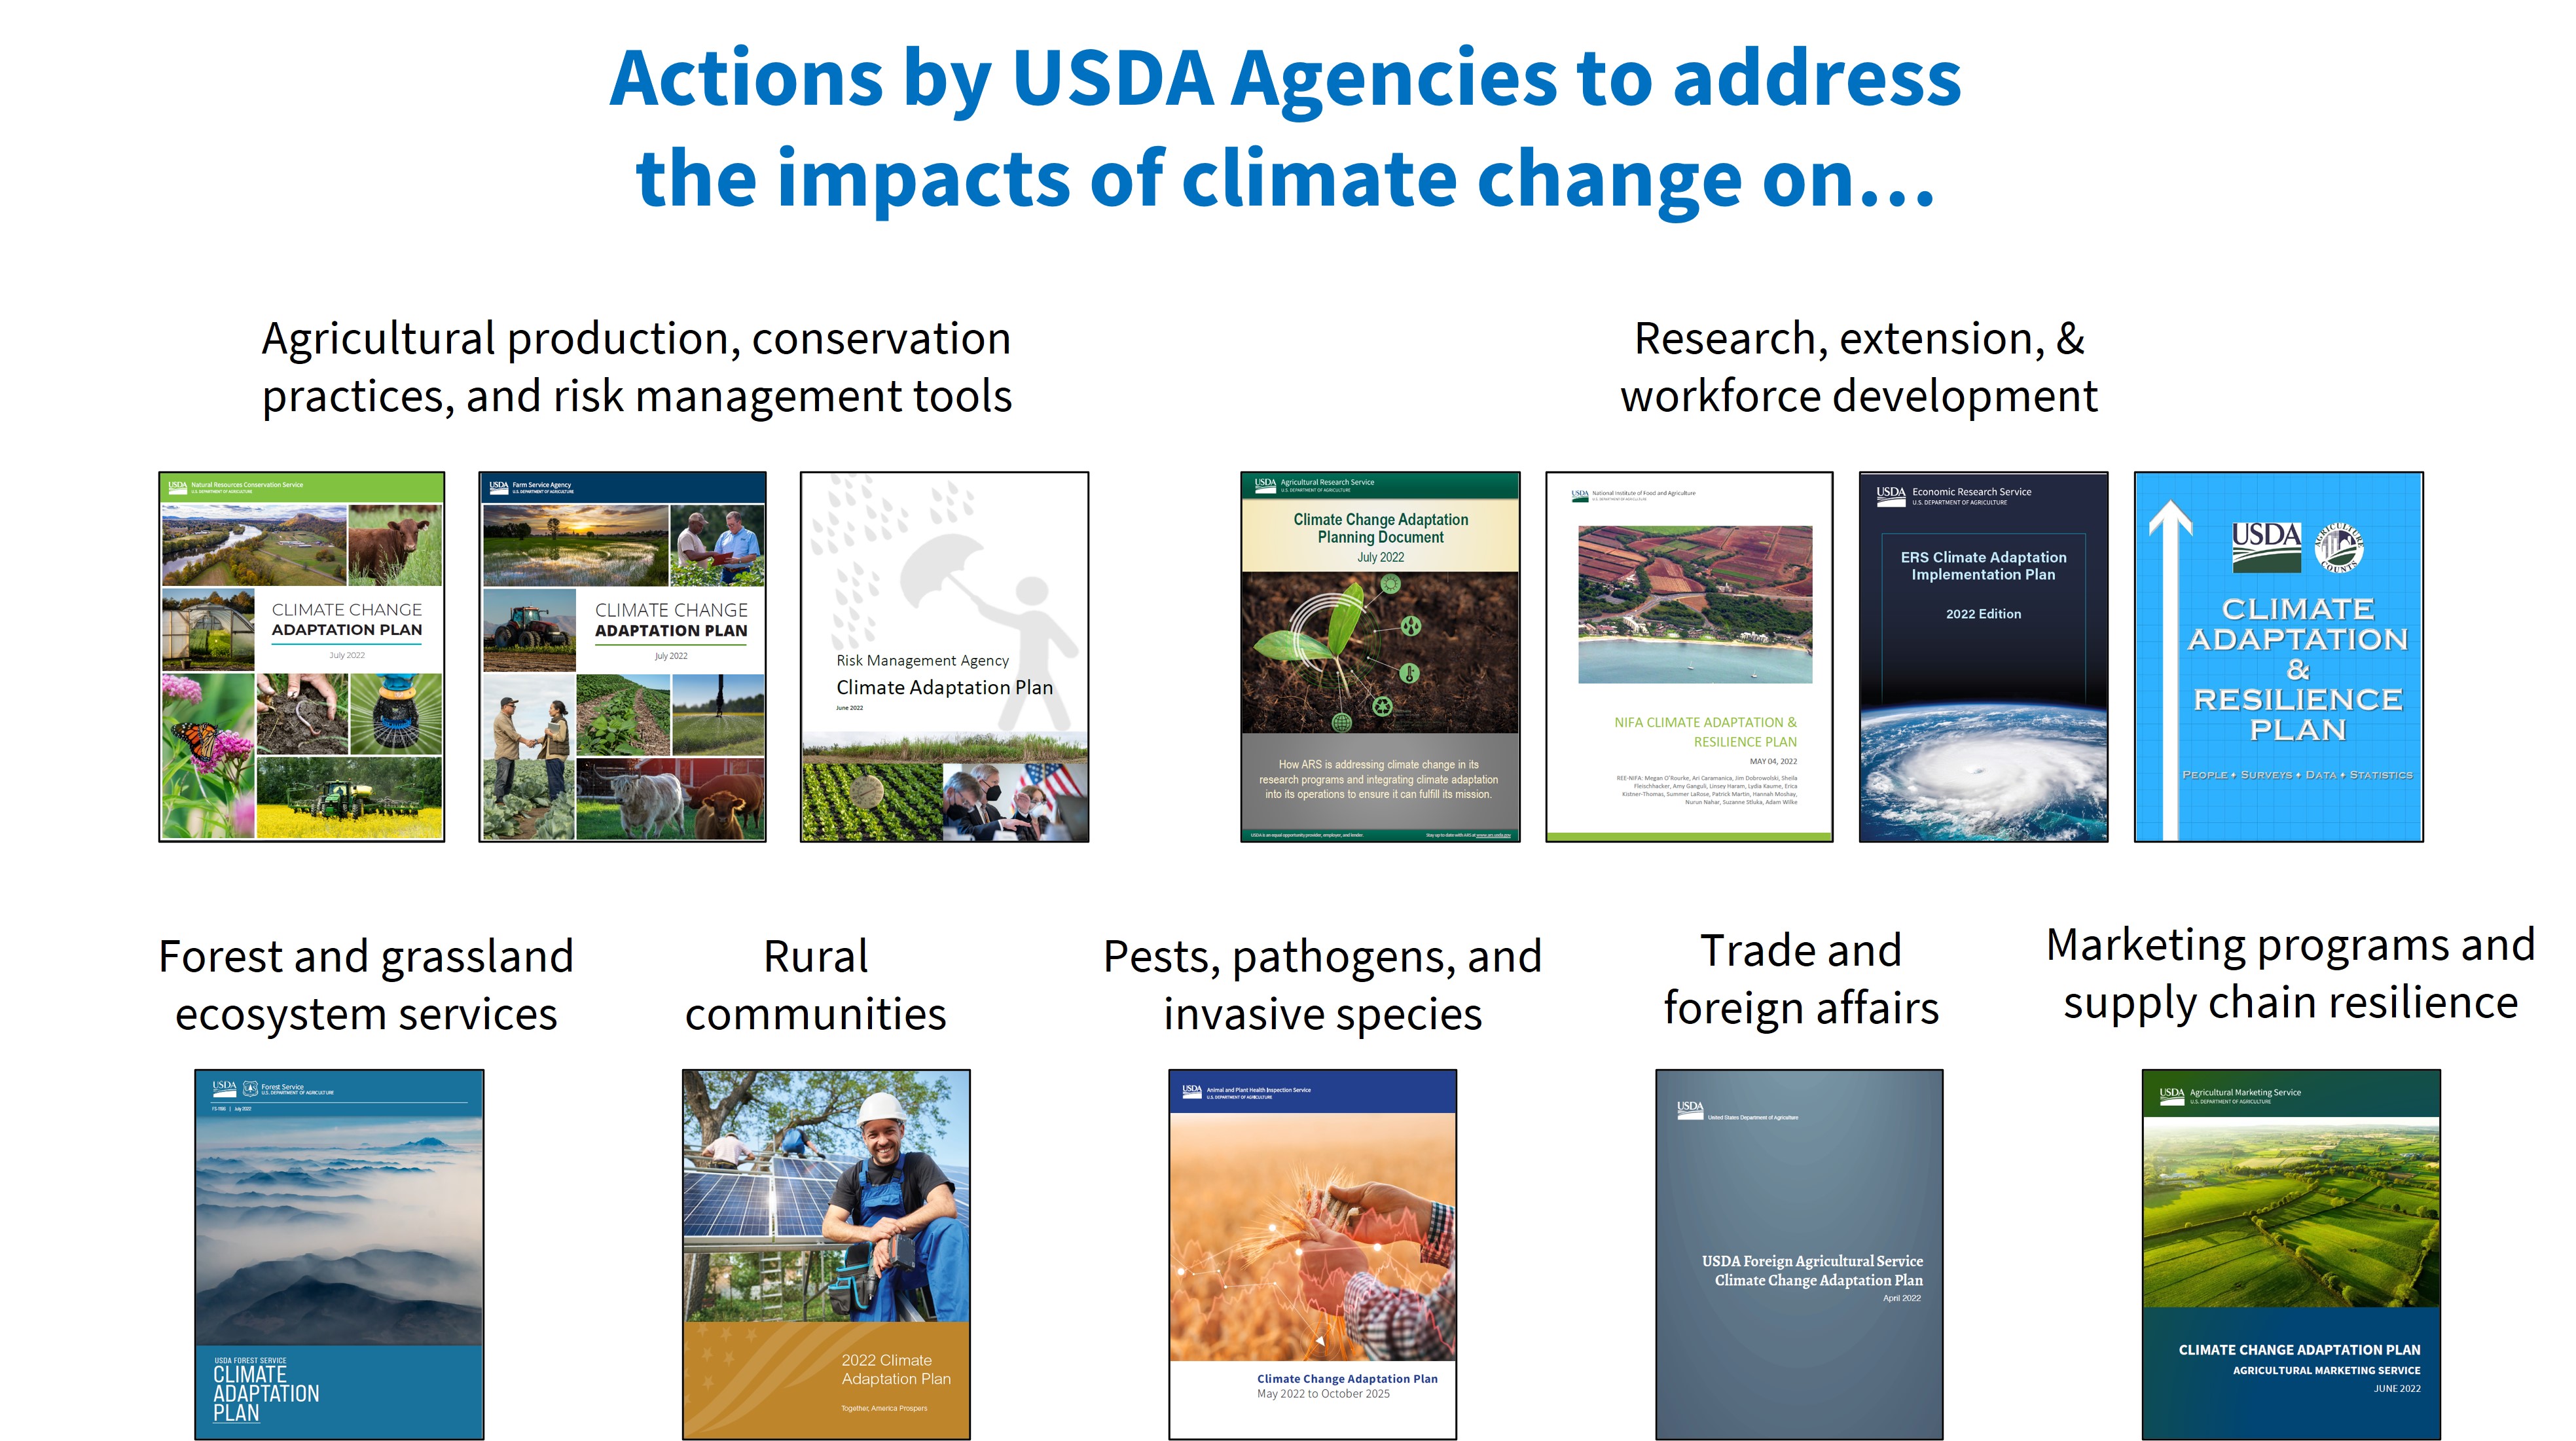 Actions by USDA Agencies to address the impacts of climate change graphic